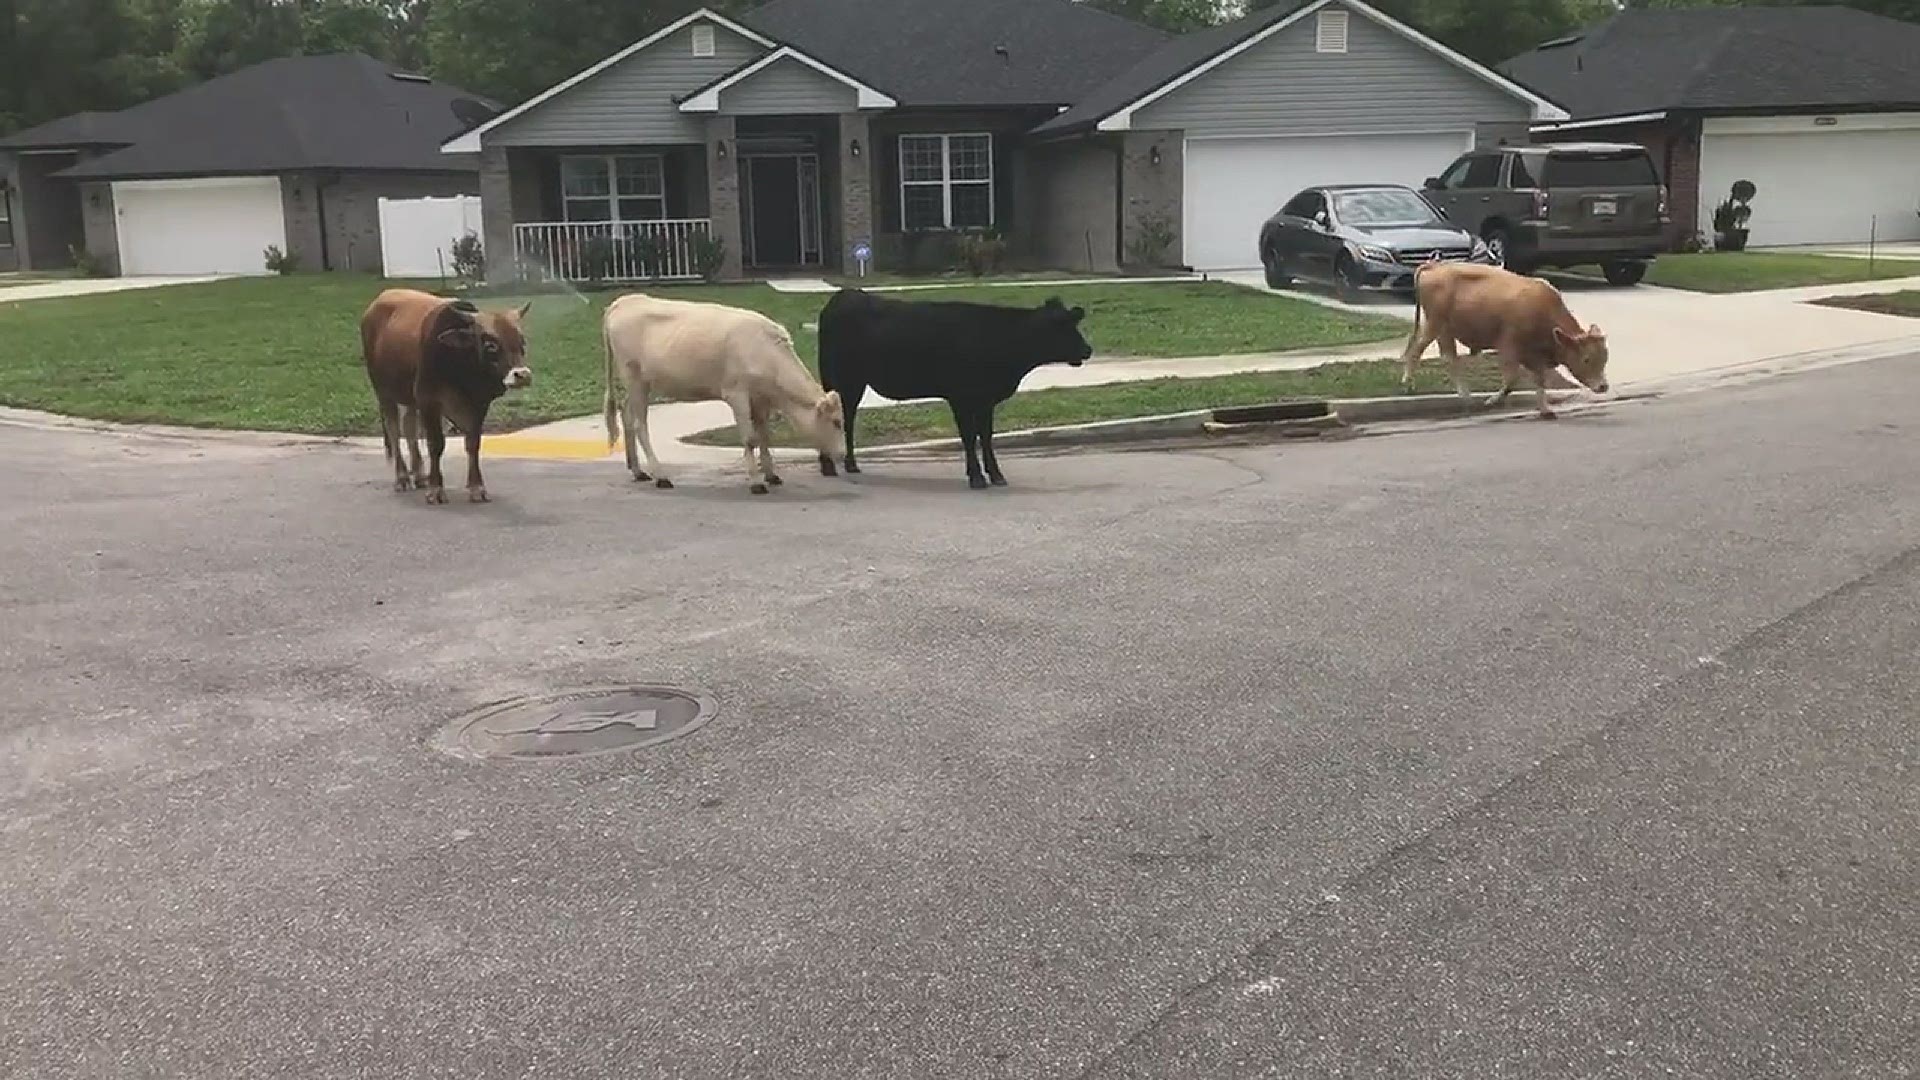 The resident on camera said she turned her sprinklers and car alarm on, but the cows did not react.